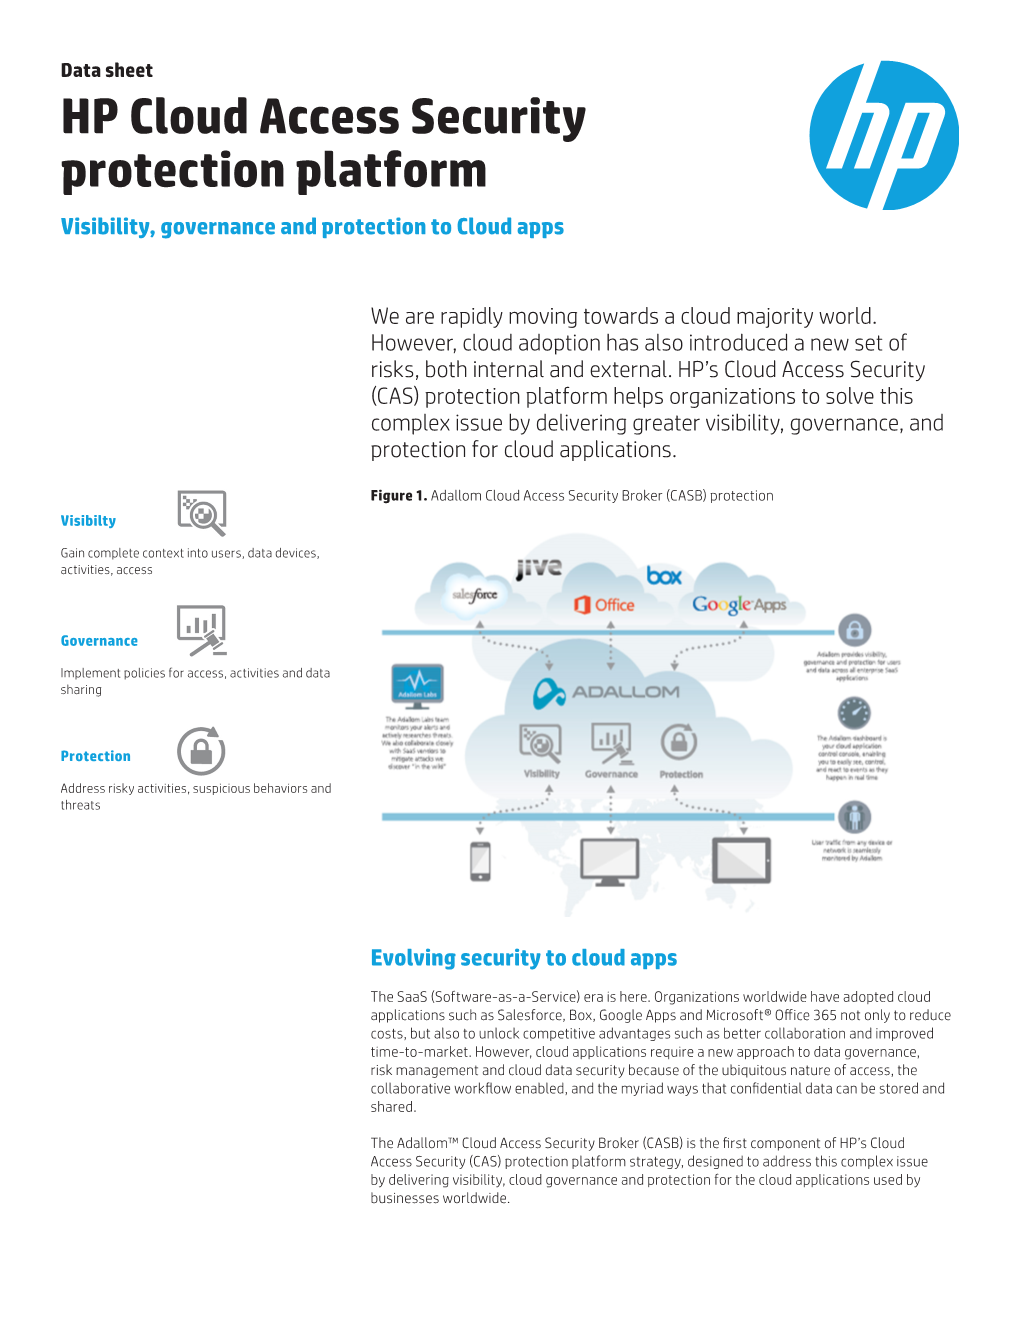 HP Cloud Access Security Protection Platform Provides Visibility